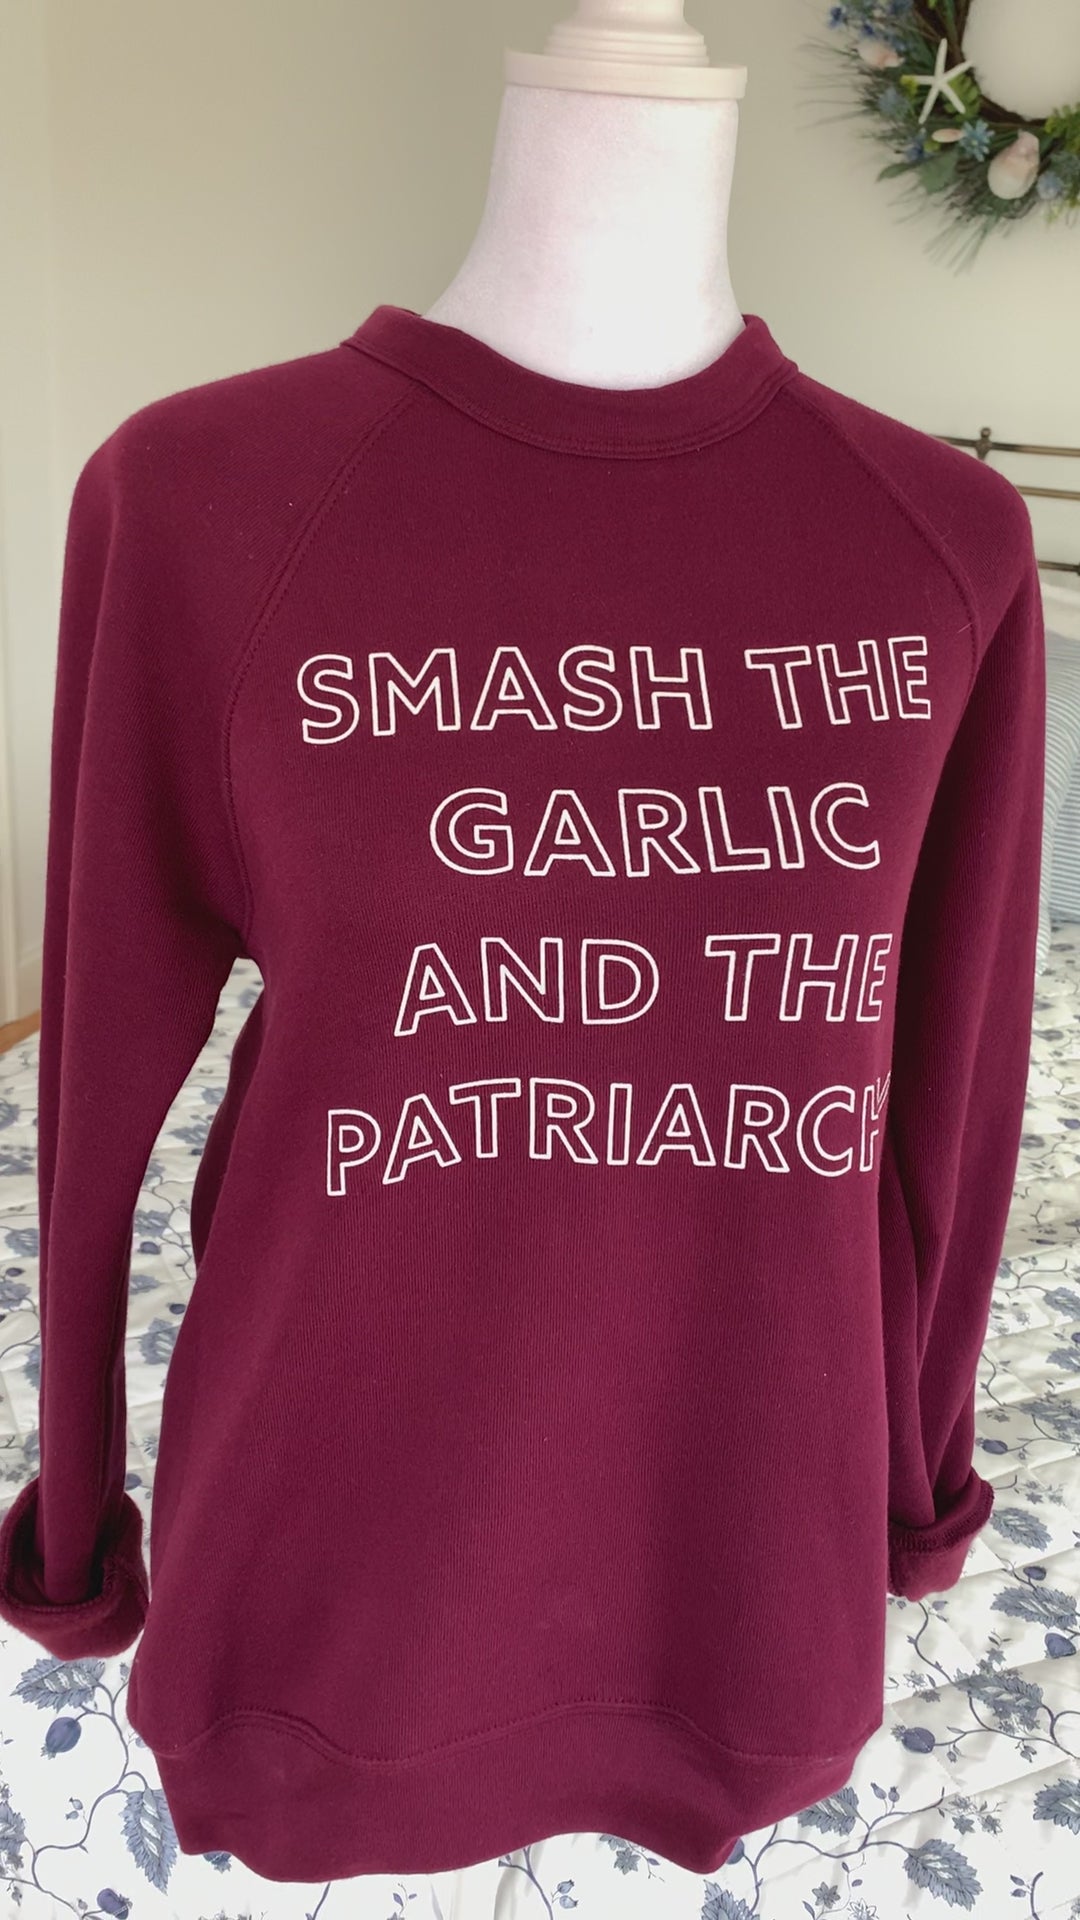 A maroon crewneck that reads "Smash the Garlic and the Patriarchy" hangs on a manikin